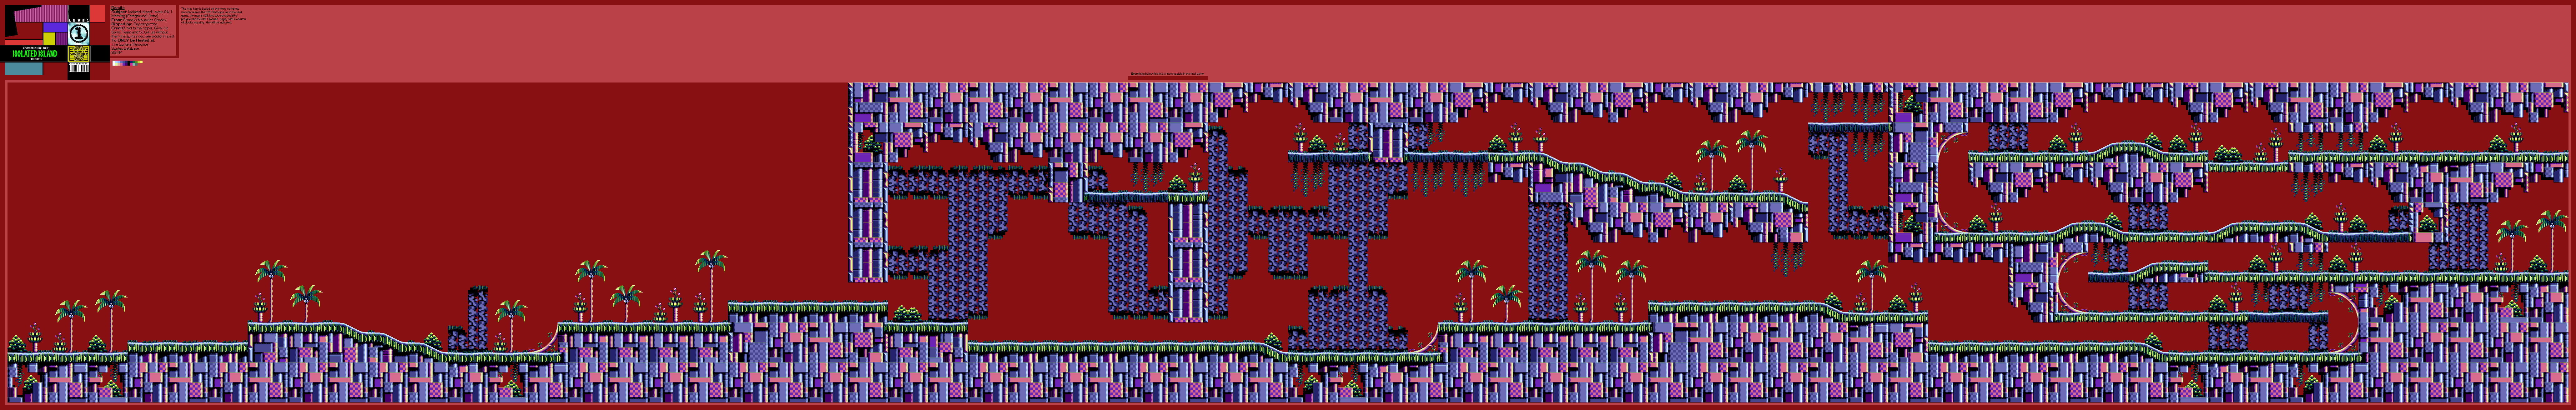 Knuckles' Chaotix (32X) - Isolated Island (Intro) Levels 0 & 1 (Morning)